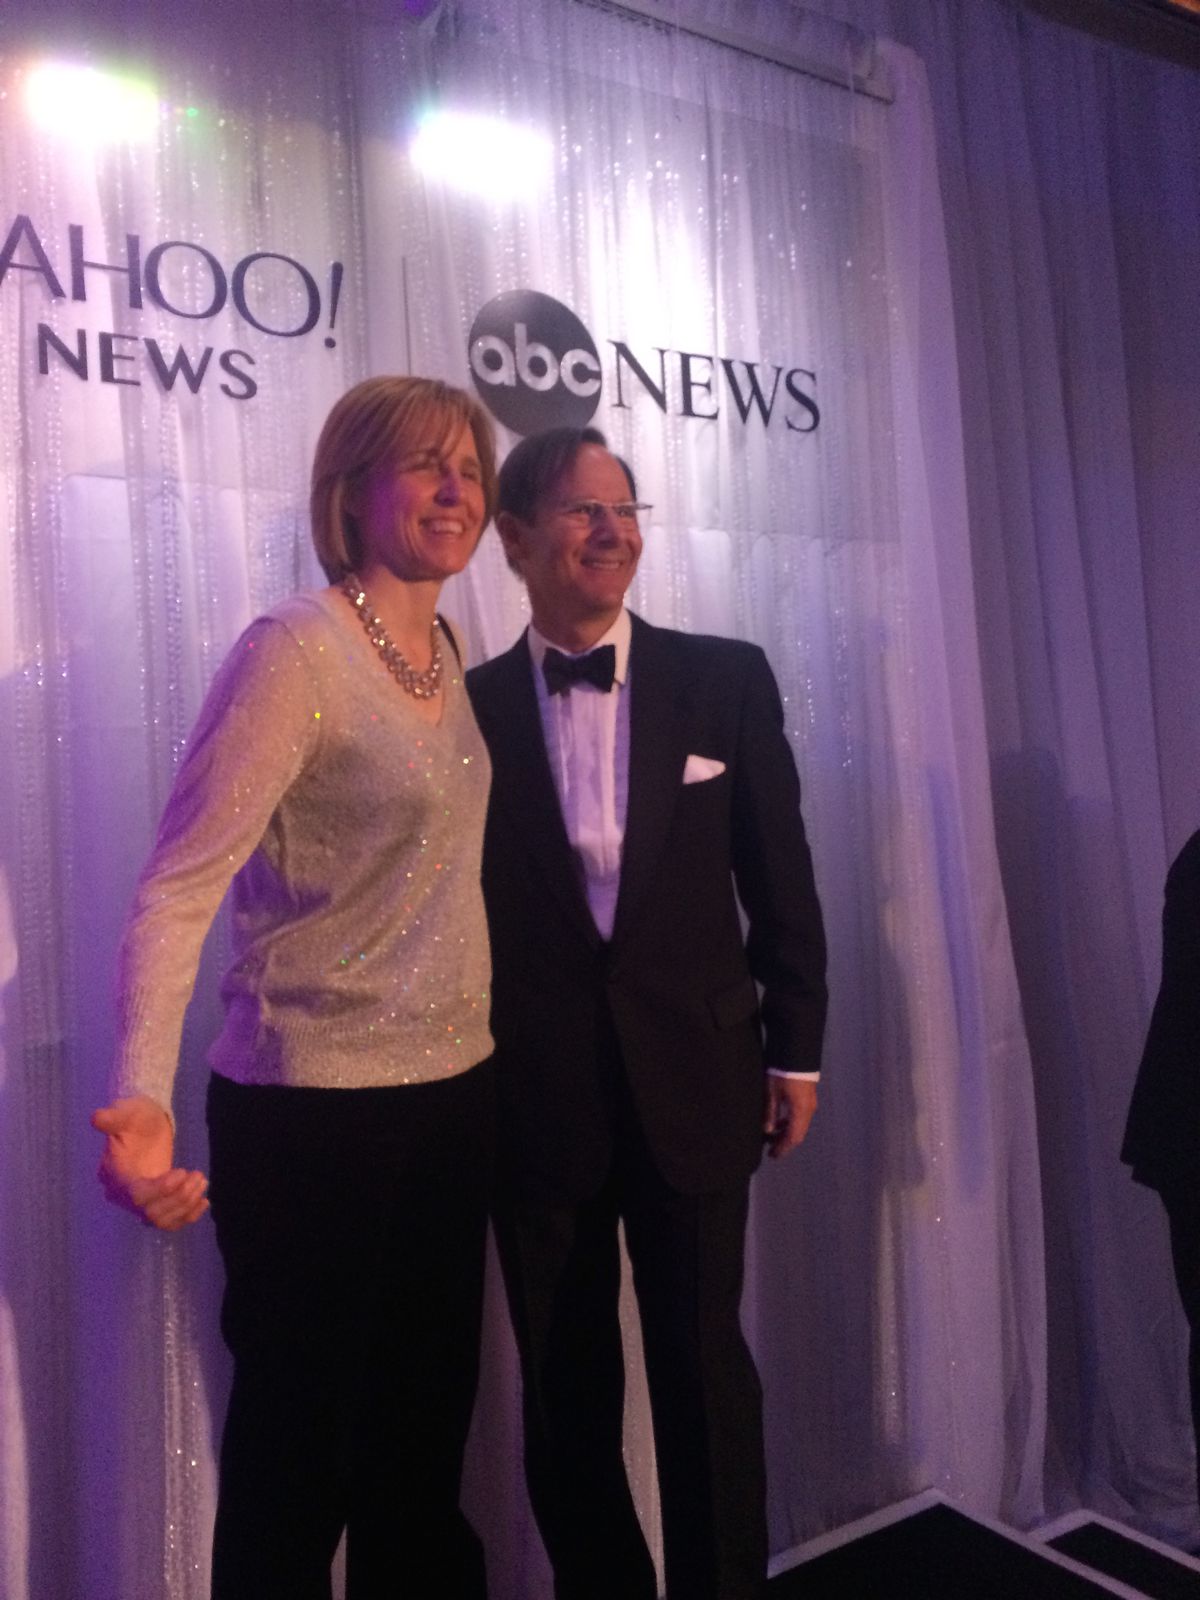 U.S. CTO Megan Smith posing for a photo with entrepreneur Craig Forman at the Yahoo/ABC News WHCD pre-party